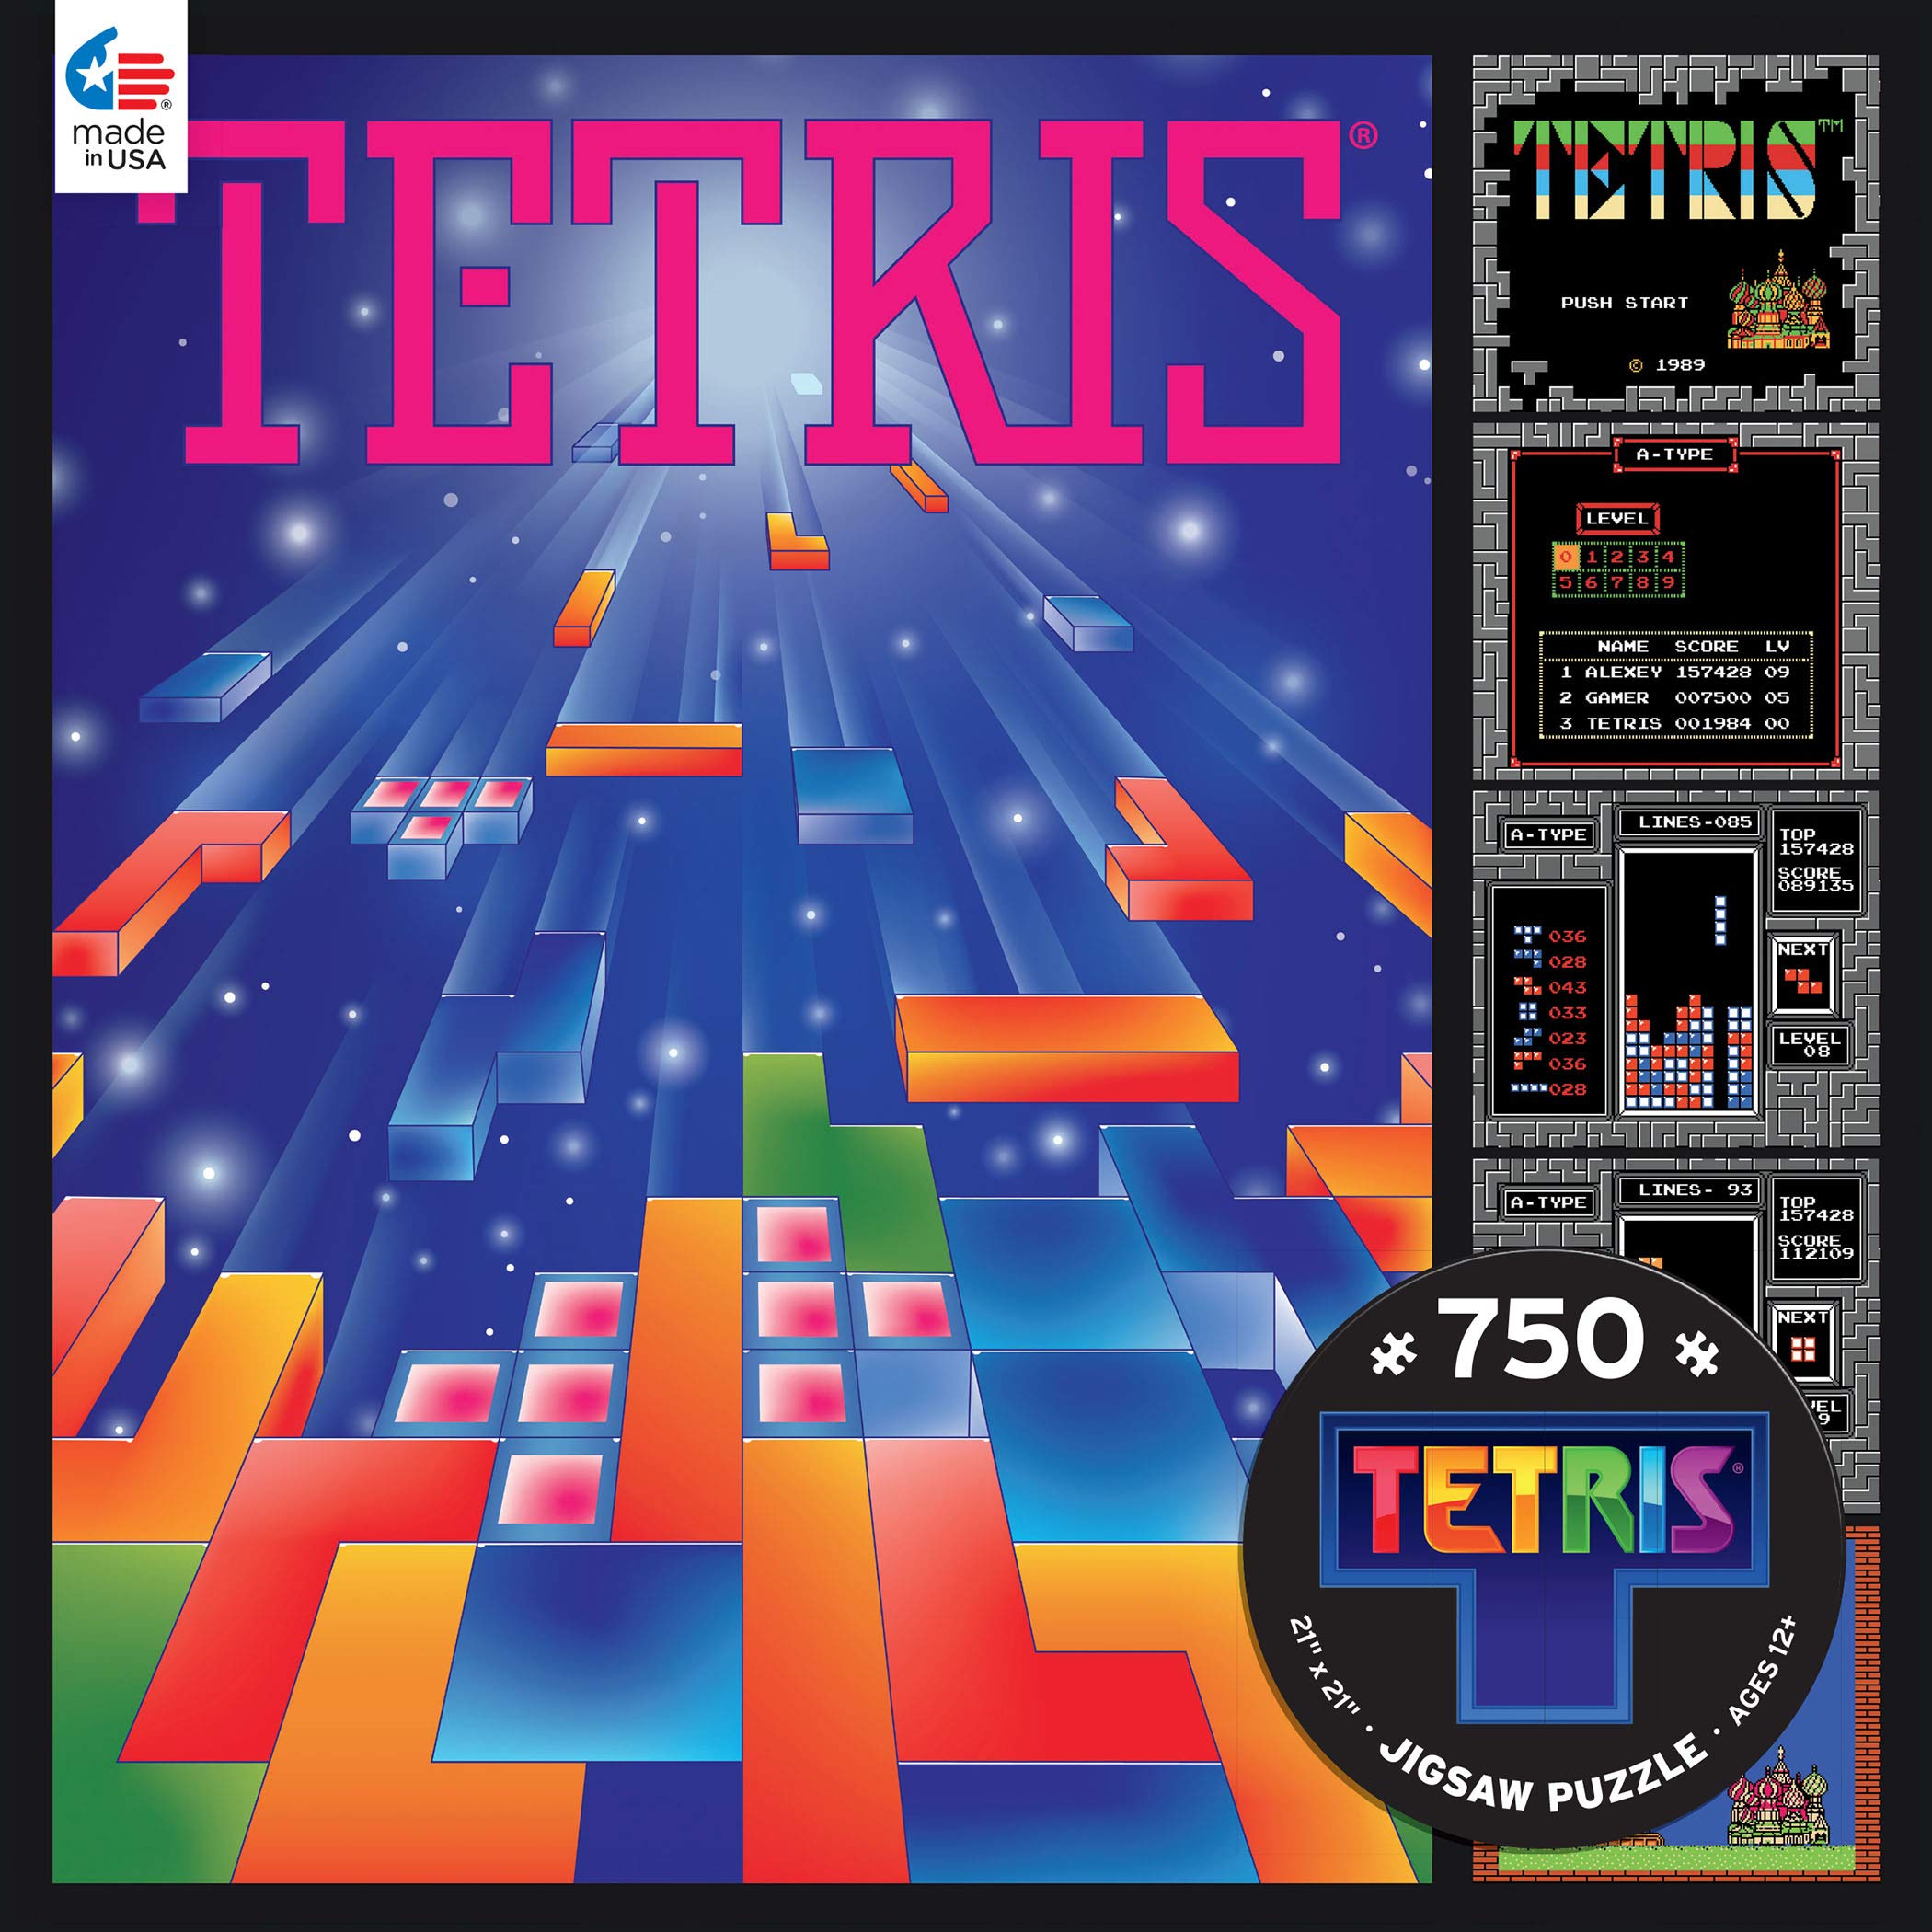 Ceaco - Tetris - Gaming Poster - 750 Piece Jigsaw Puzzle